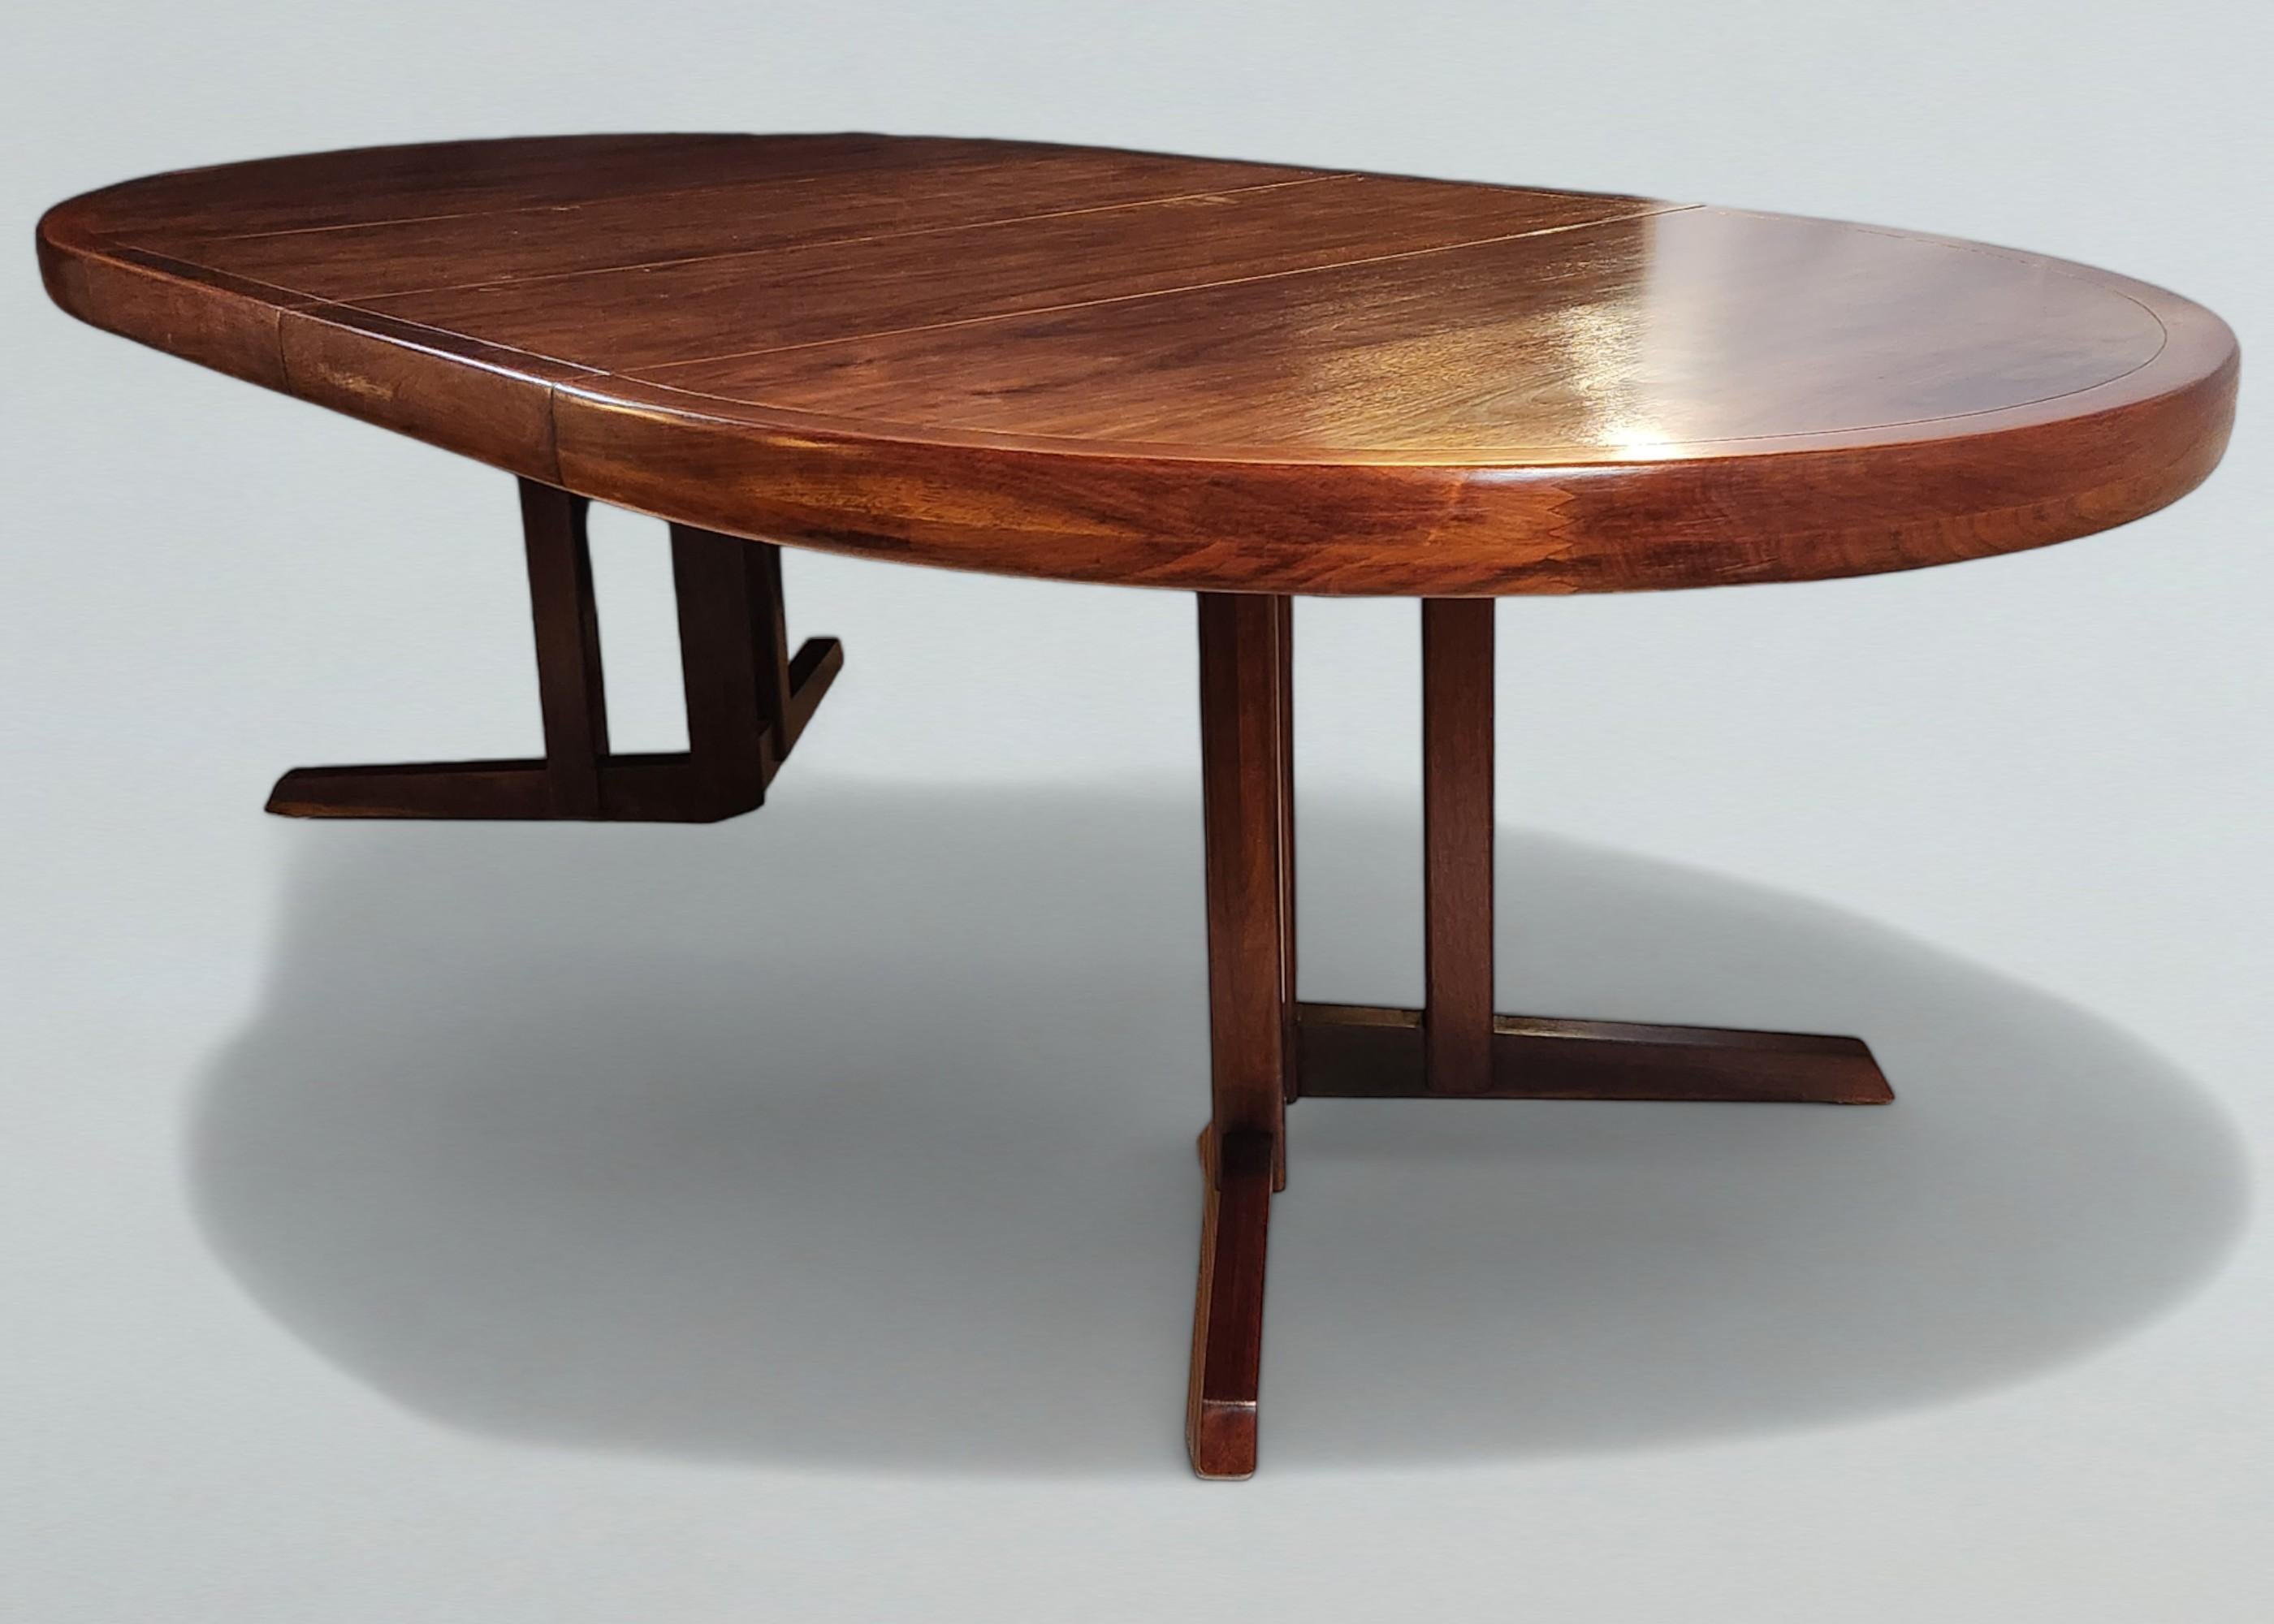 An extendable walnut dining table by George Nakashima for Widdicomb Furniture Company from 1959.
A line of bookmatched veneers encased by a 3 inch deep carved and finger joined solid walnut edge gives the top of the table an interesting contrast.